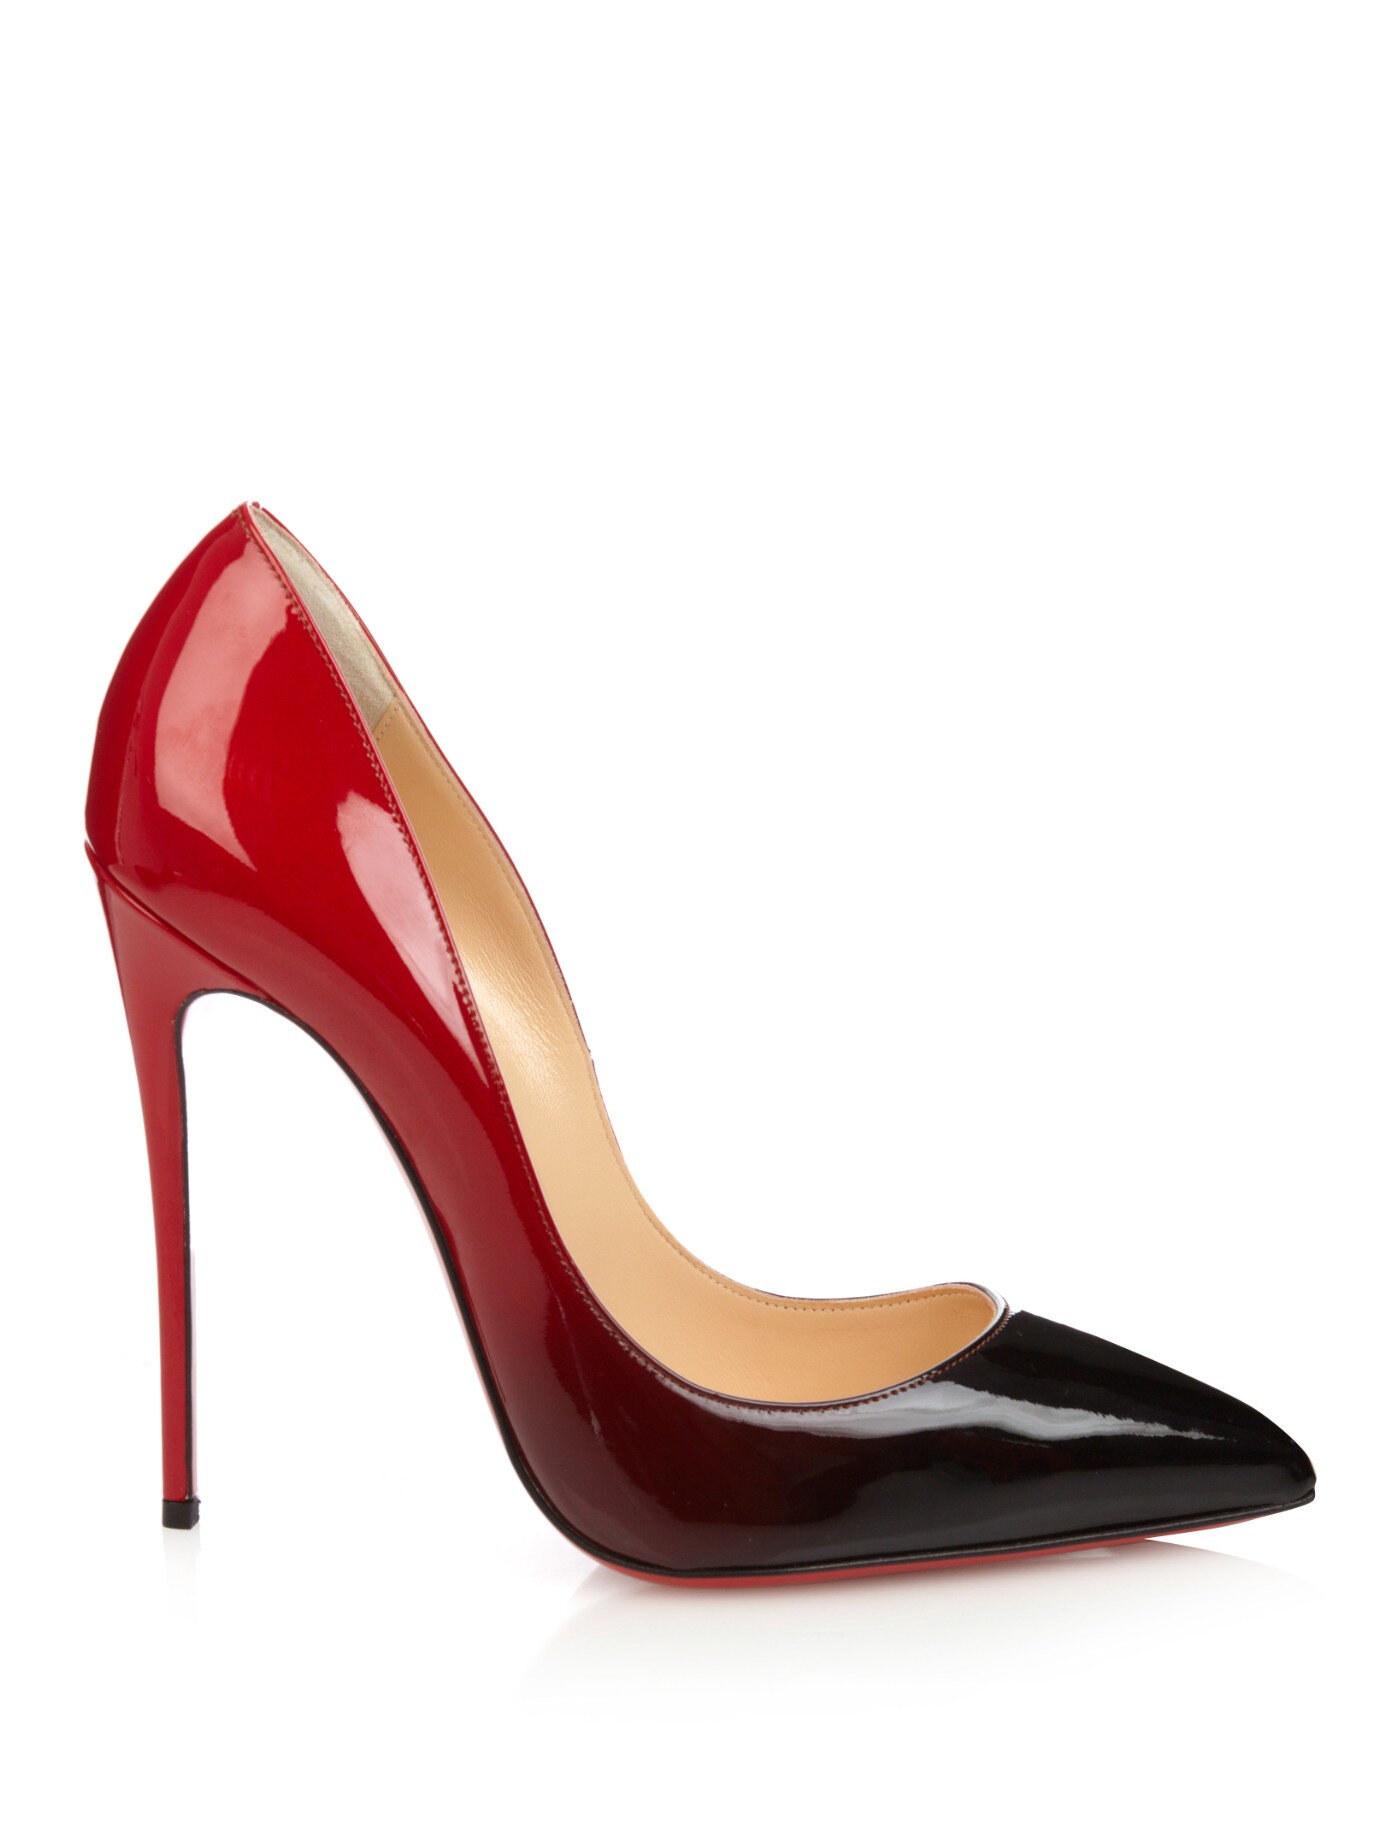 Christian Louboutin Pigalle Follies Pumps in Black and Red Ombré.jpg